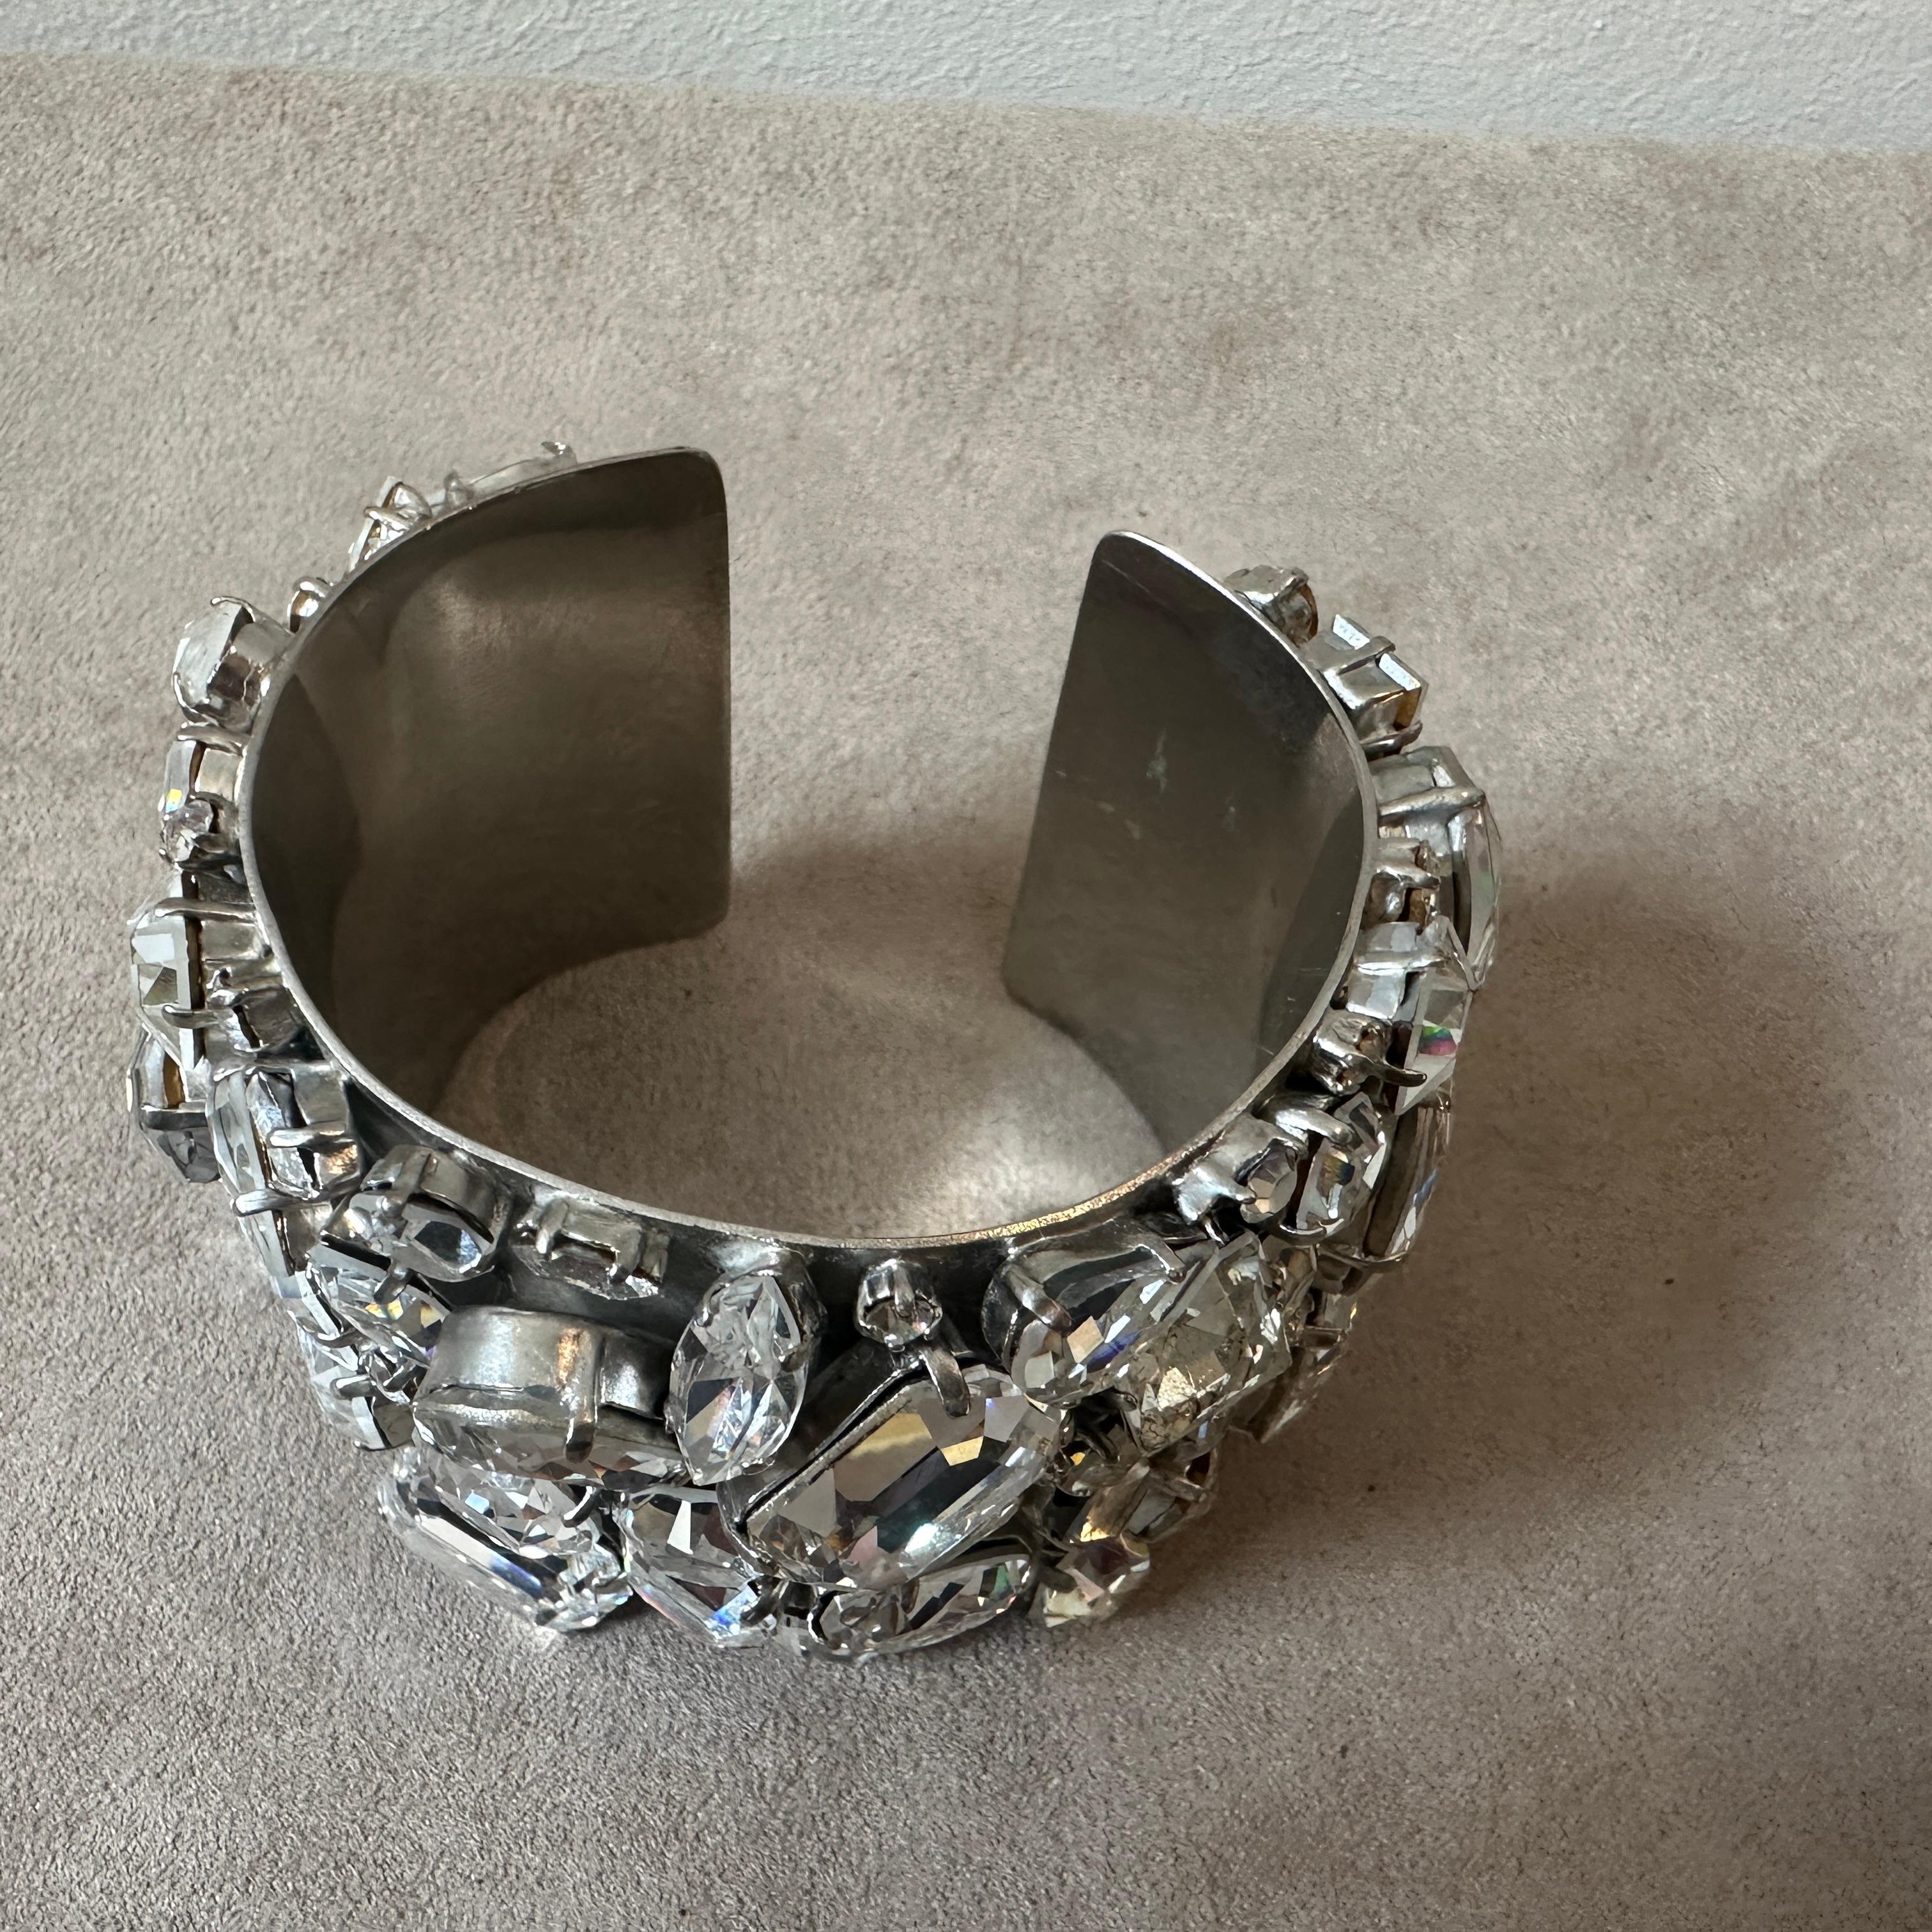 A Strass and Silvered Metal Italian Retro Bracelet By Dsquared2 In Excellent Condition For Sale In Aci Castello, IT